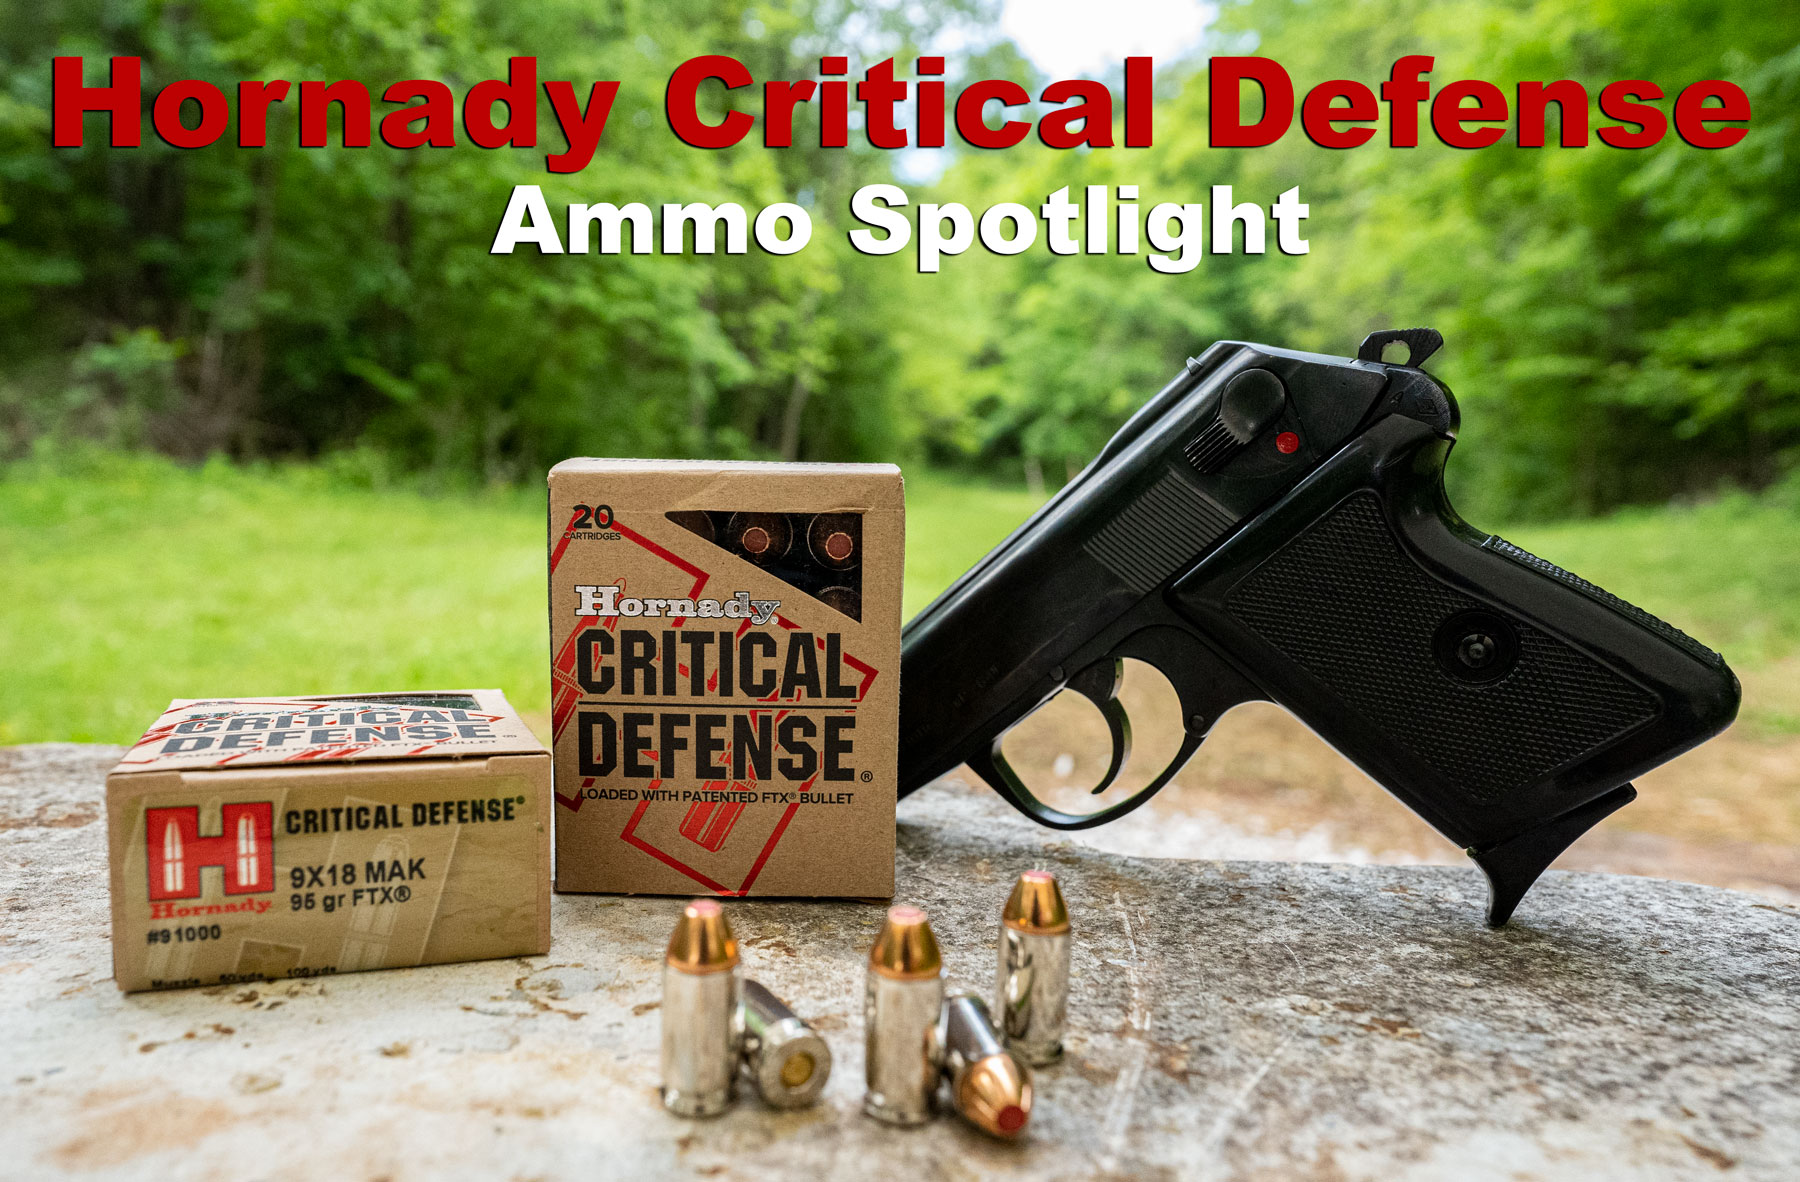 Hornady Critical Defense with pistol at a shooting range